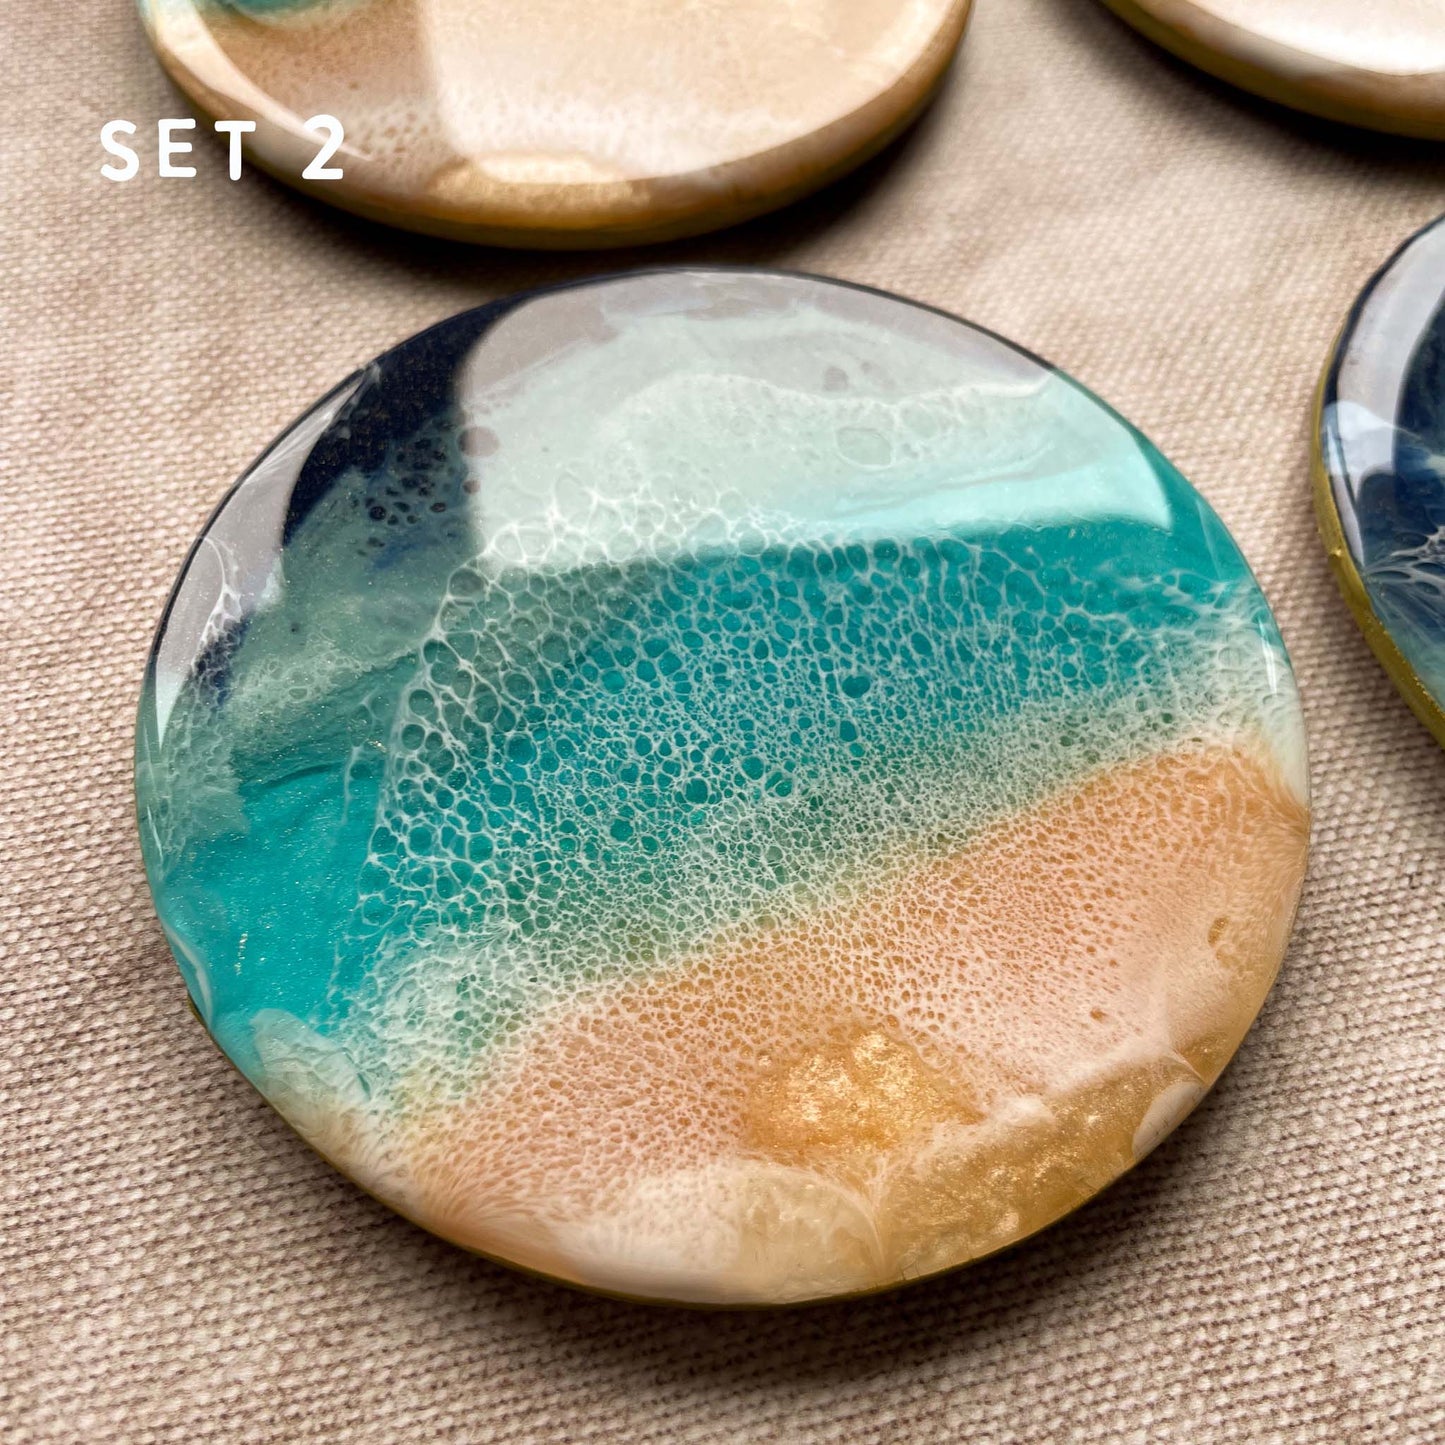 Enhance your living space with these stylish ocean coasters, a thoughtful gift for those who appreciate beach decor.